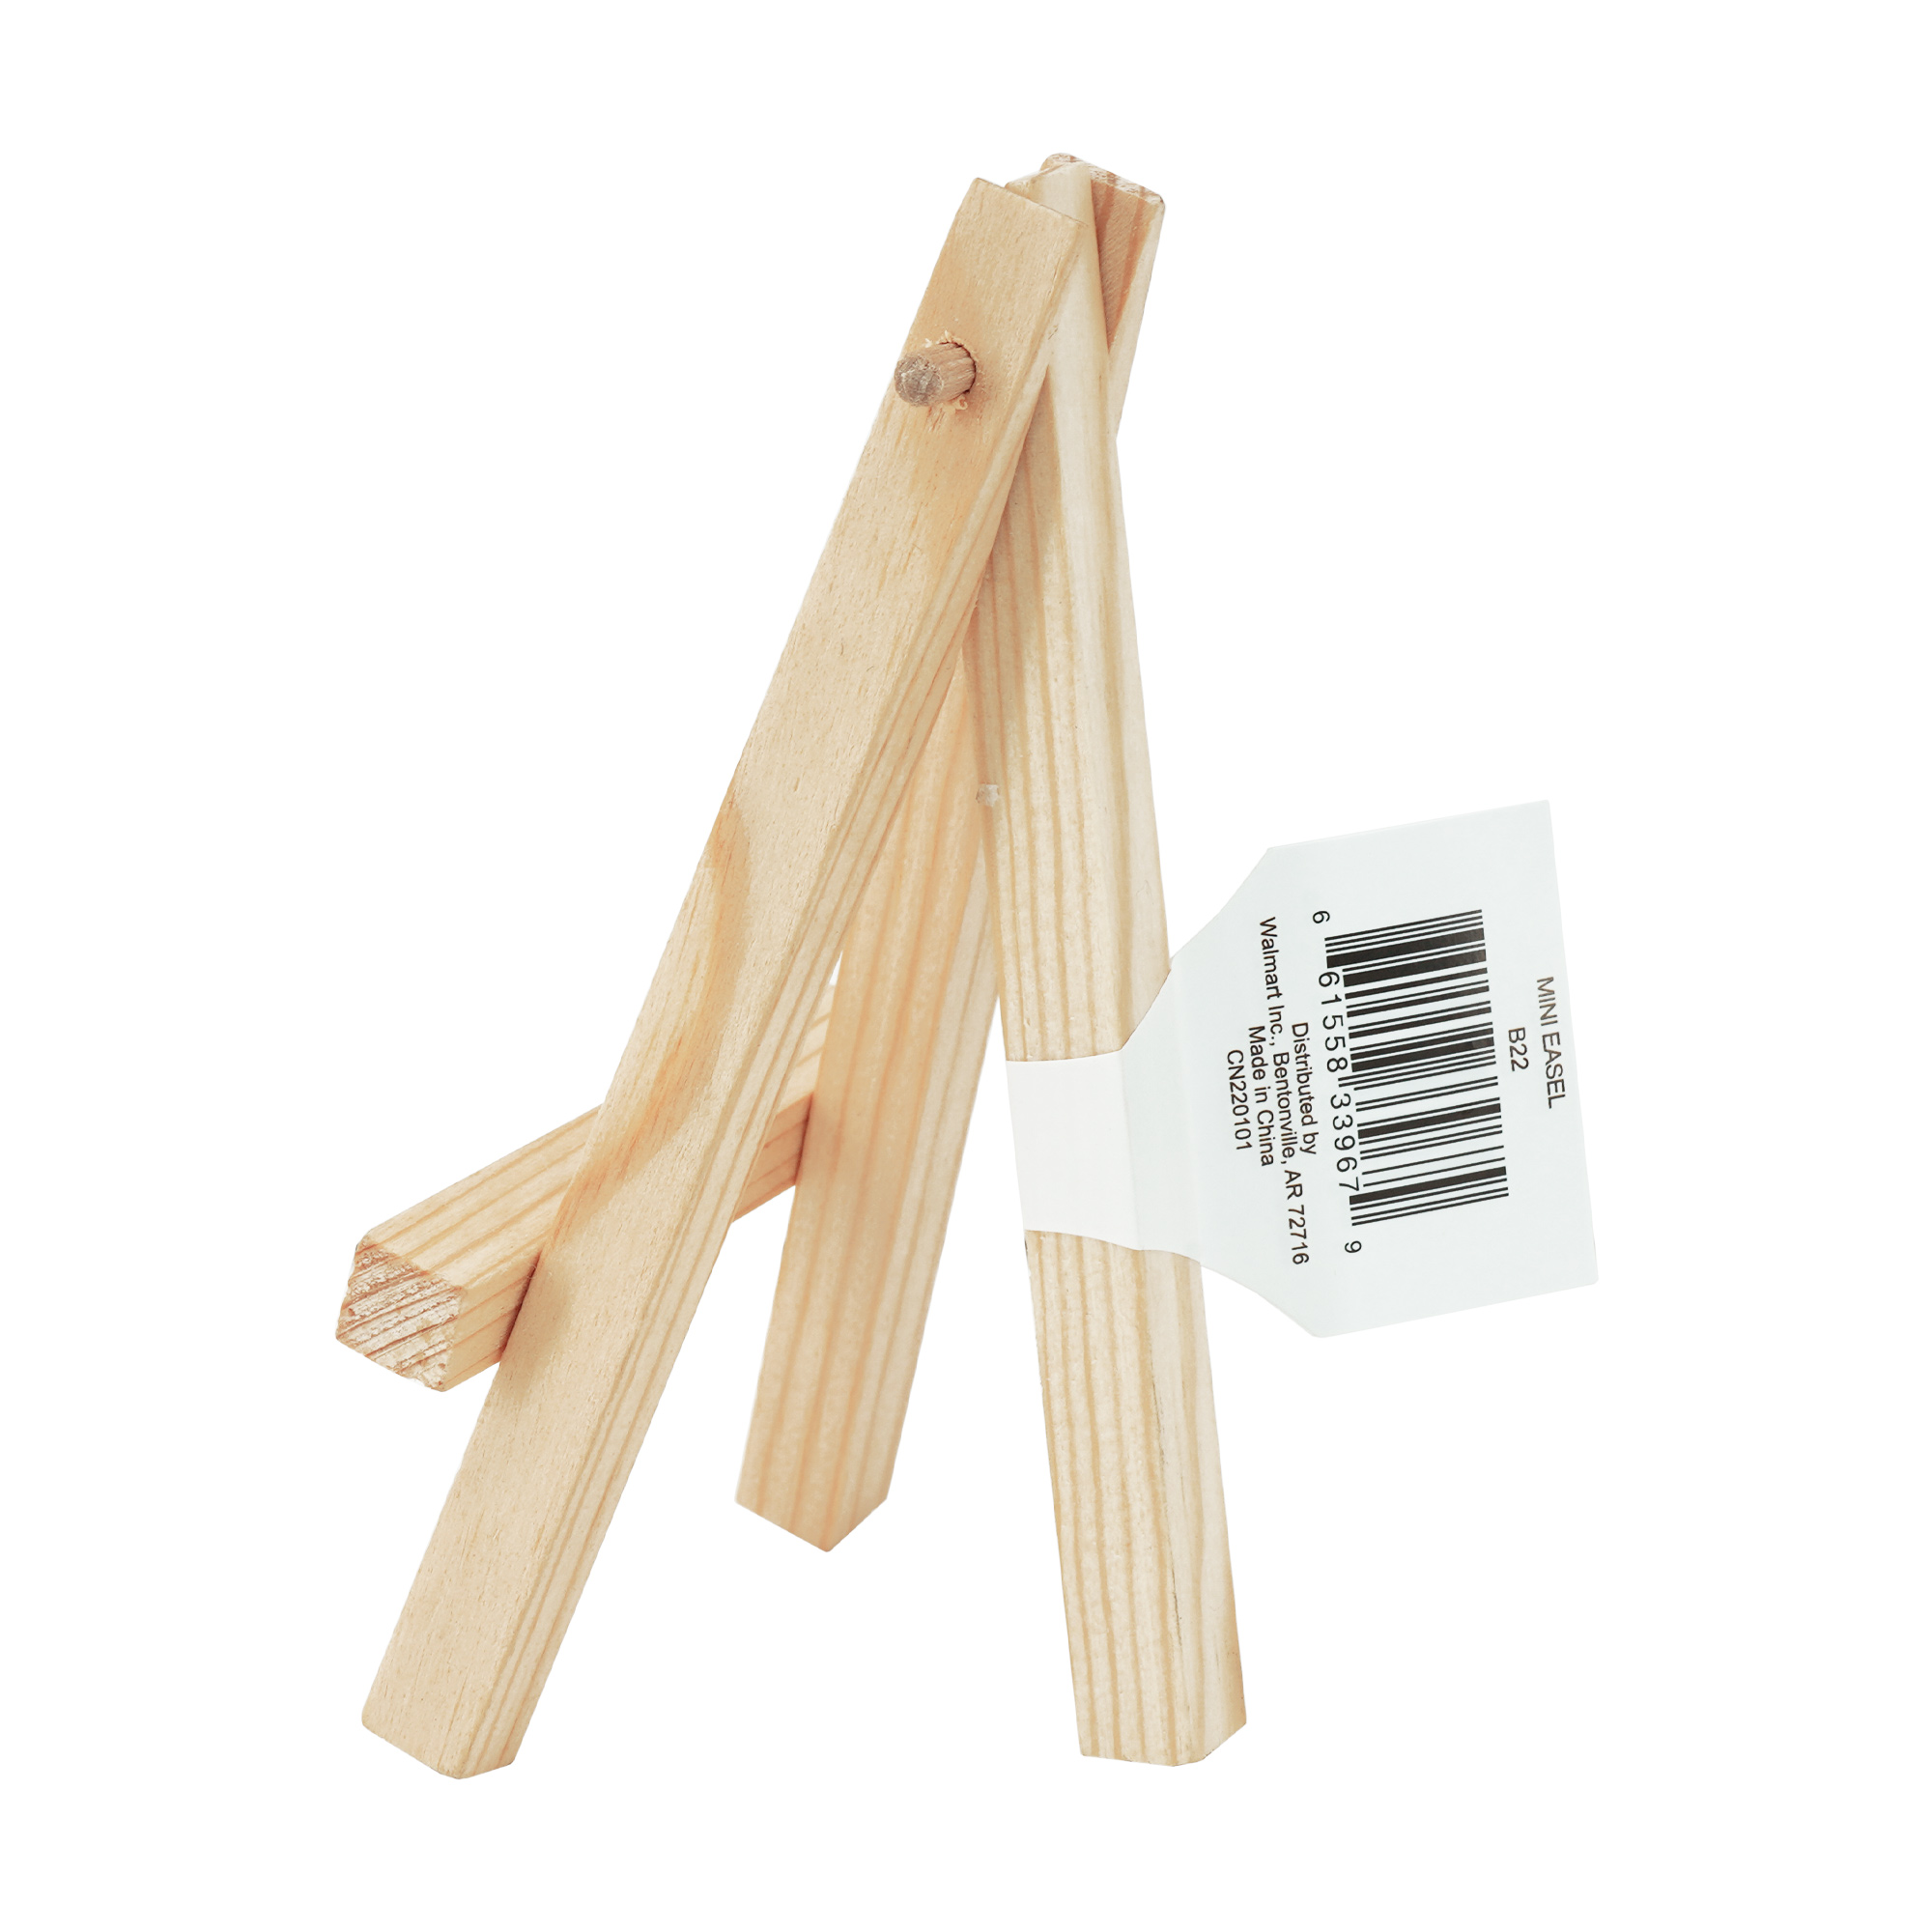 Mini Natural Wood Display Easel, Solid Pine Wood, 4.8", 1 Piece, Vendor Labelling, Great Chioce for Beginners and Hobbyists of all skill levels. - image 4 of 4